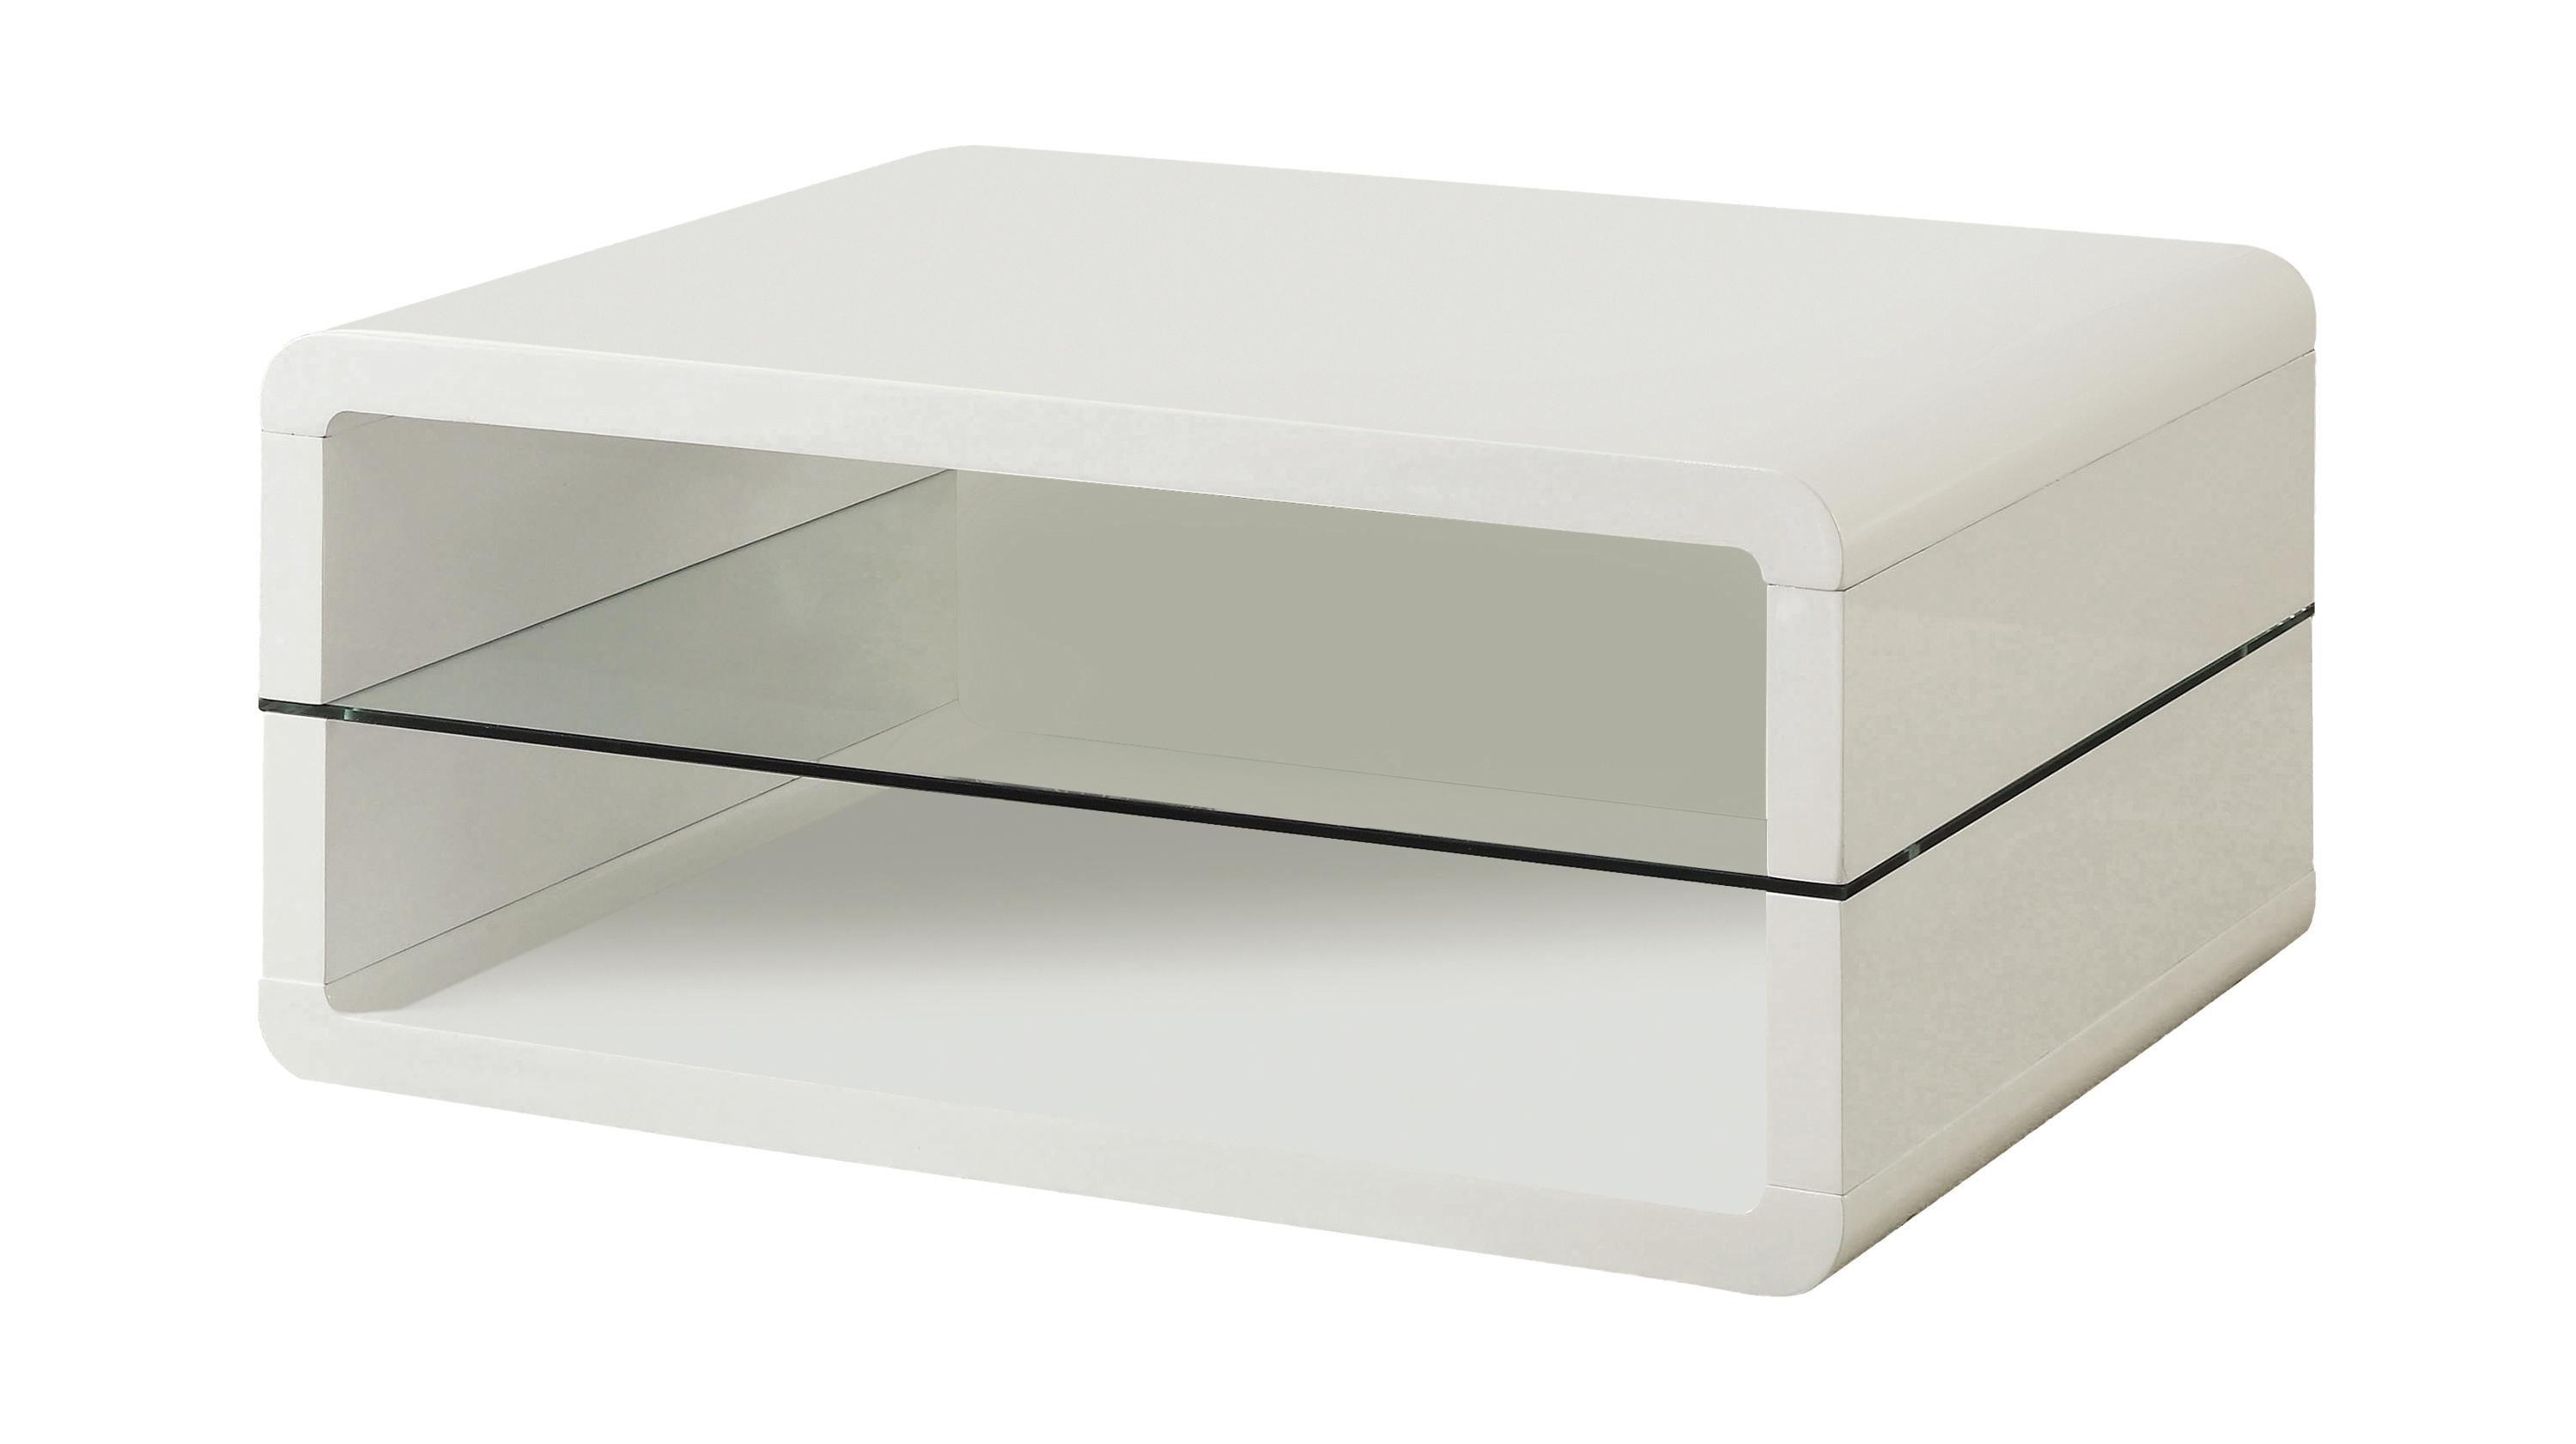 Contemporary Coffee Table 703268 703268 in White 